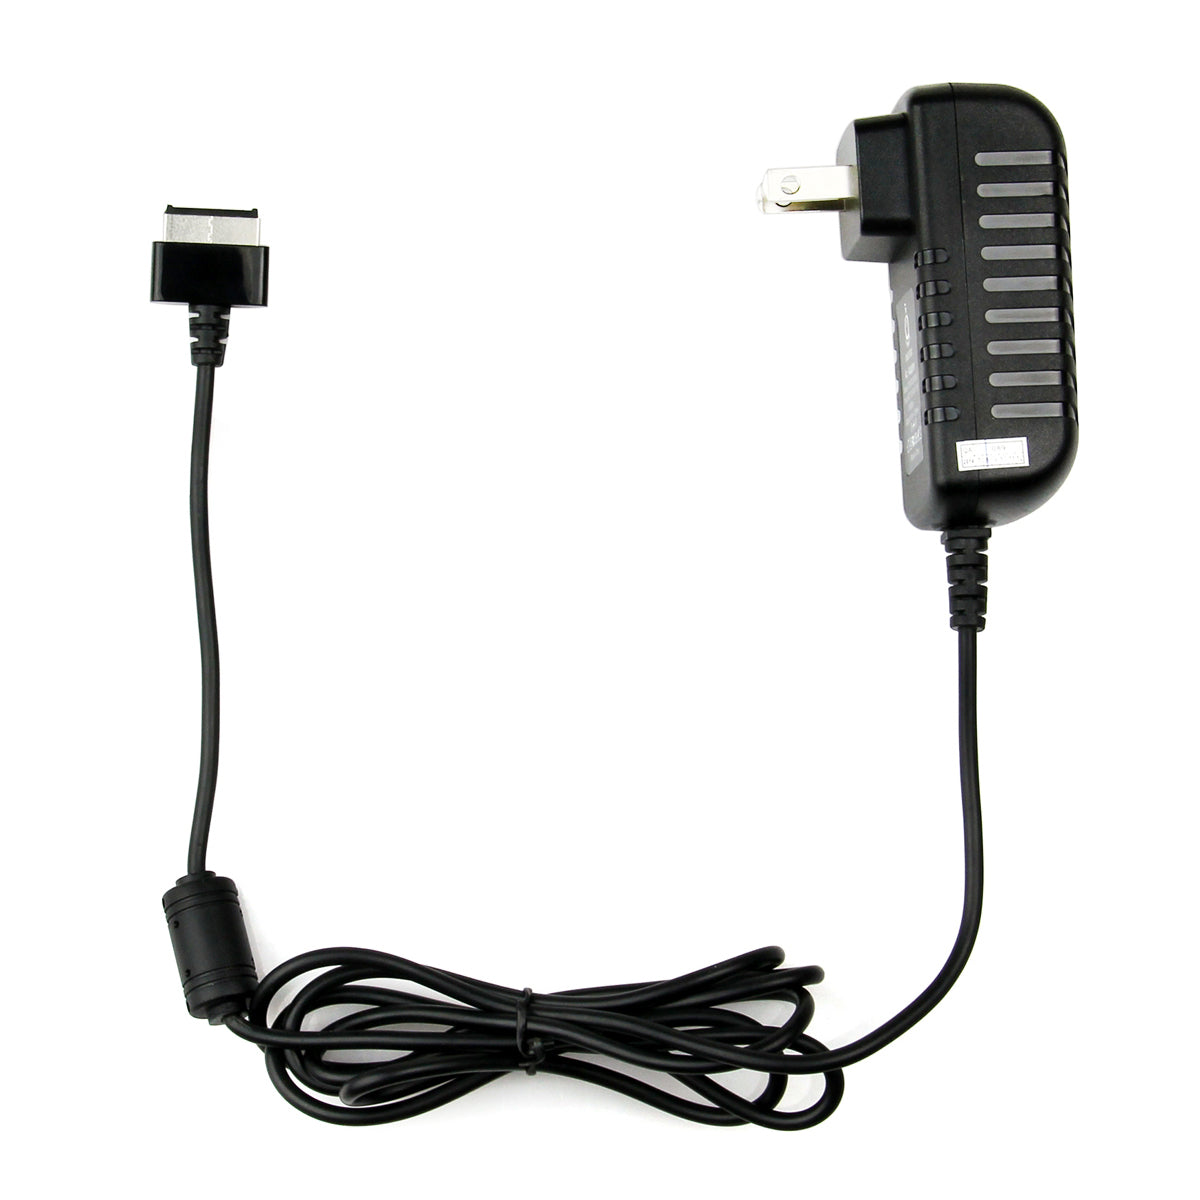 AC Adapter Charger for ASUS Eee Pad Transformer TF700T.